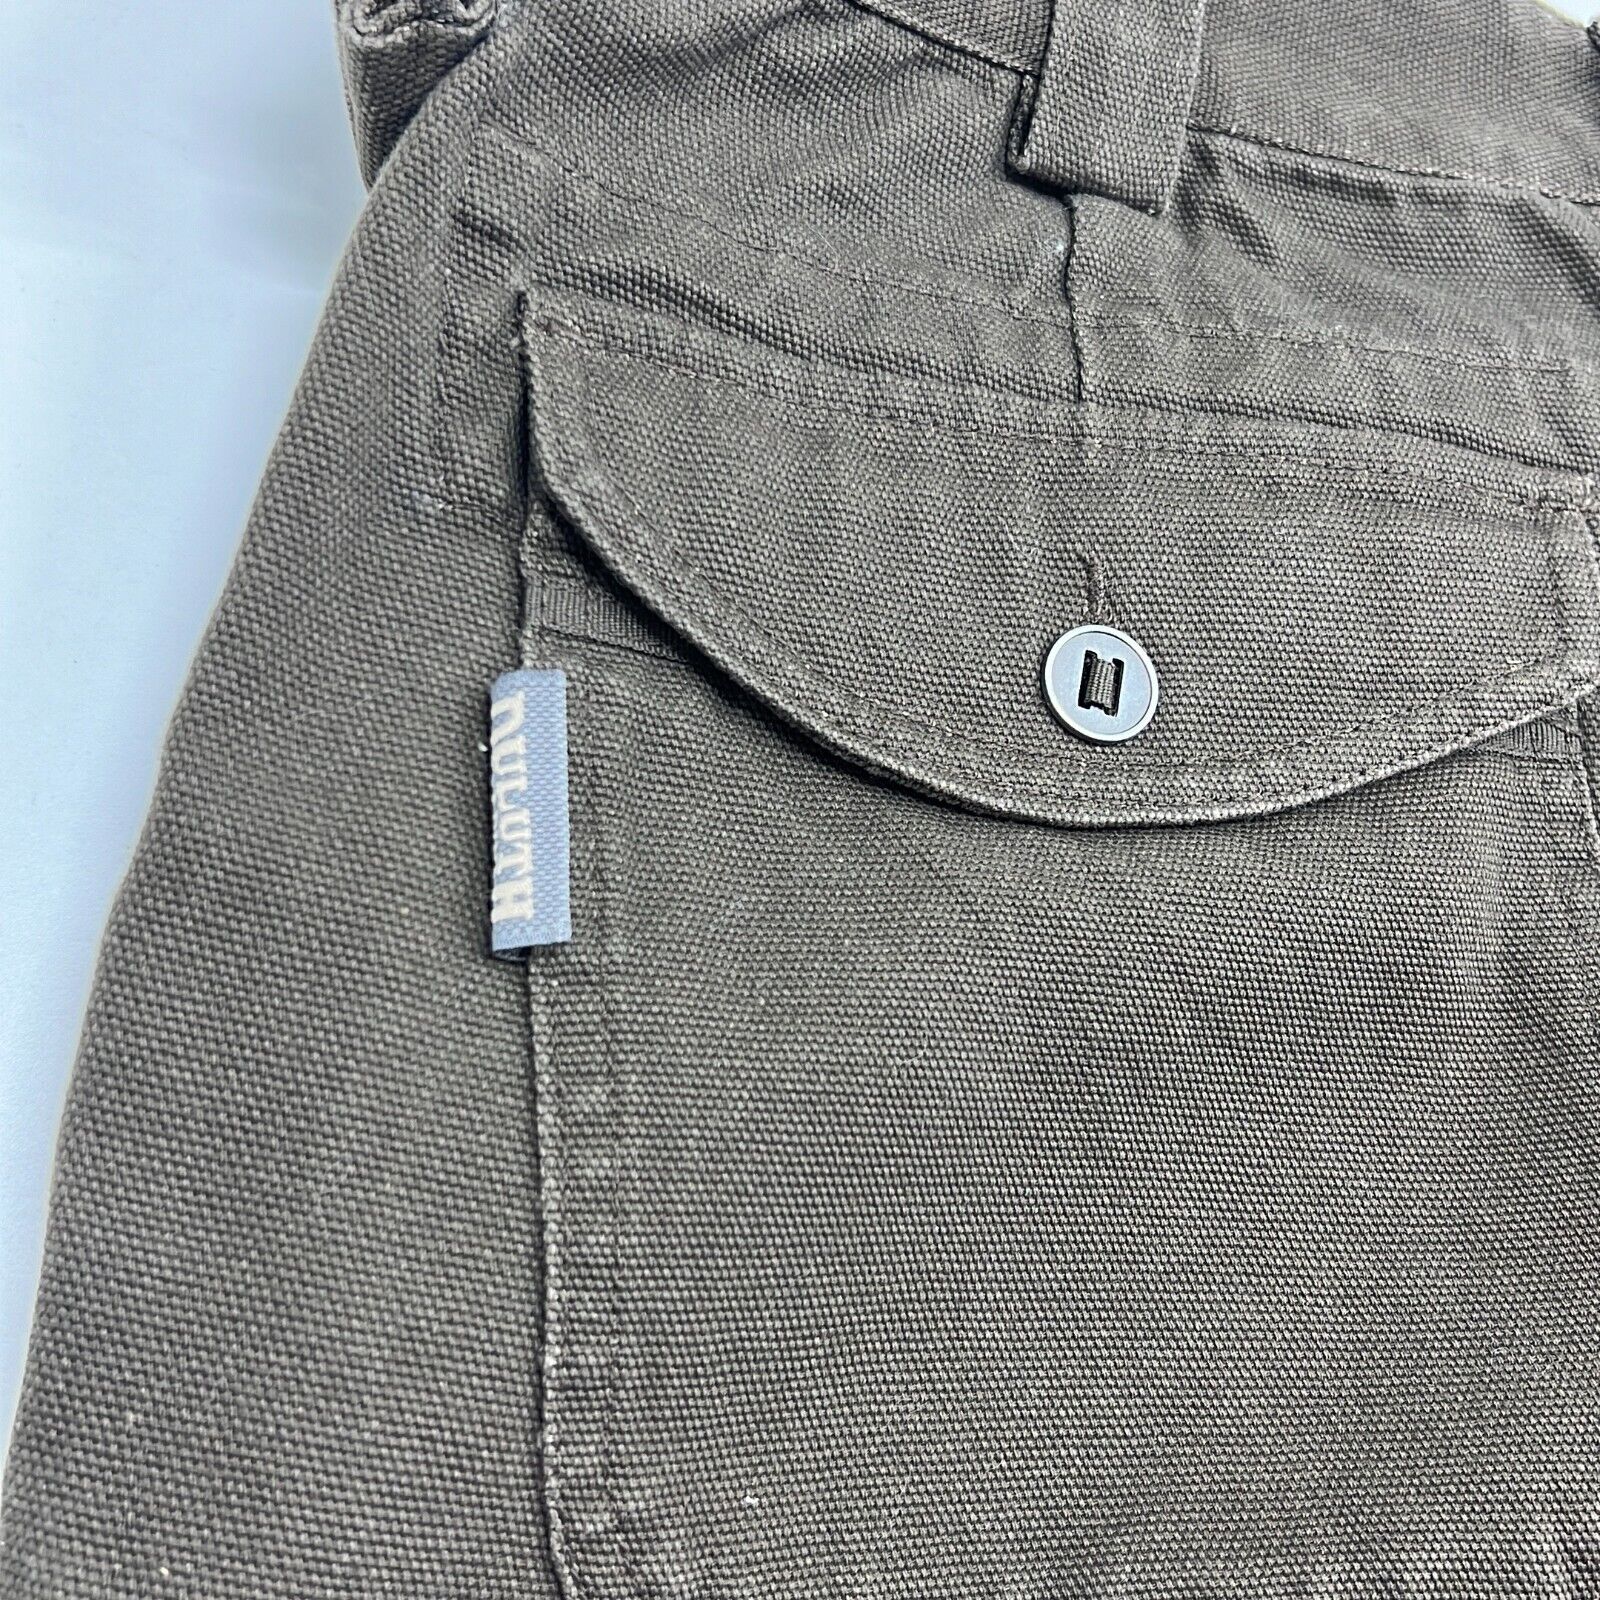 Duluth Trading Co. Men's Brown Cotton Flat Front Pockets Cargo Pants Size 36x30